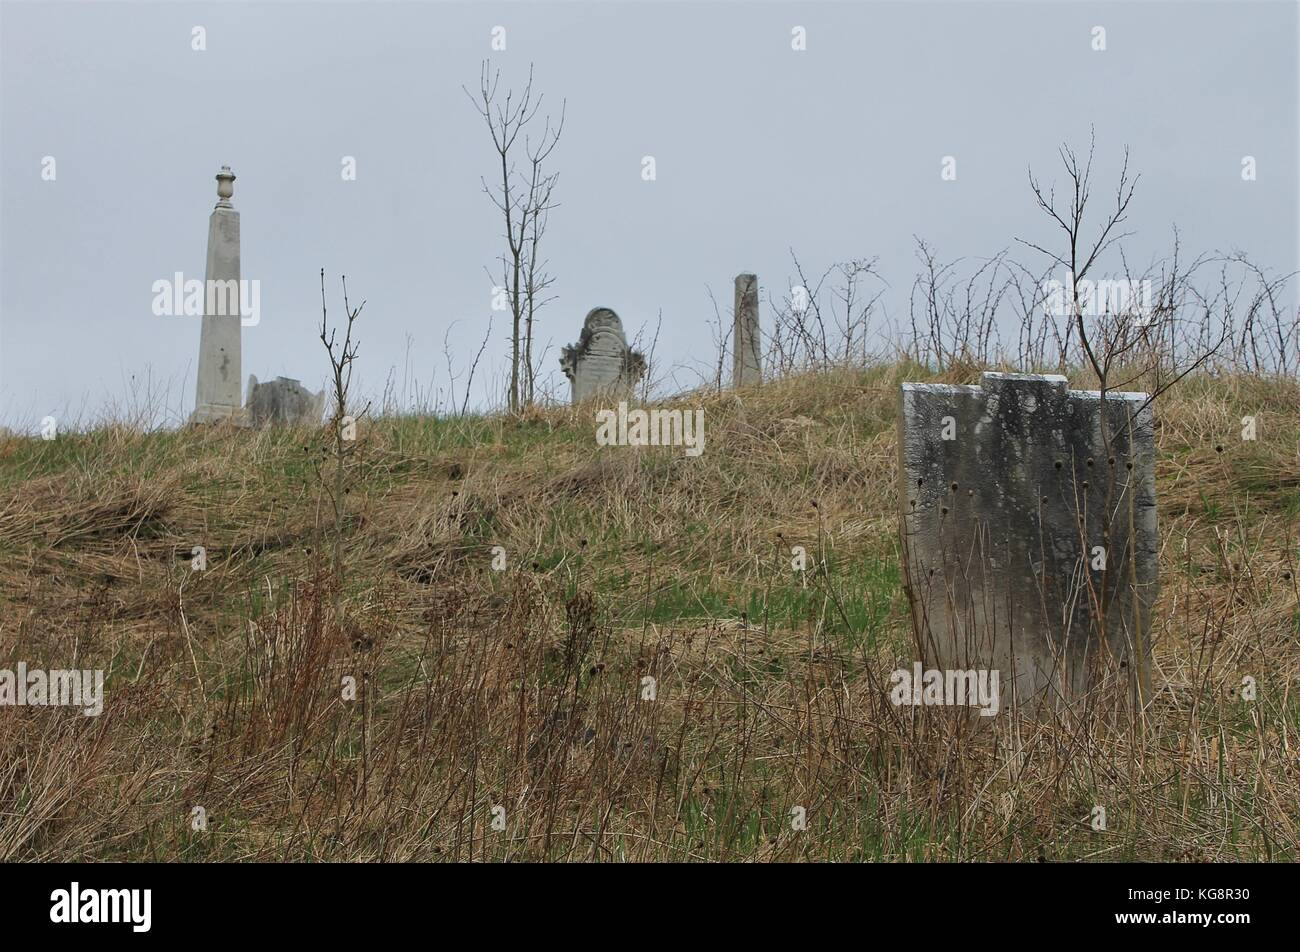 Old headstones in the old St. George's Cemetery, adjacent to St. George's Heritage Church, Brigus, Newfoundland and Labrador, Canada. Stock Photo